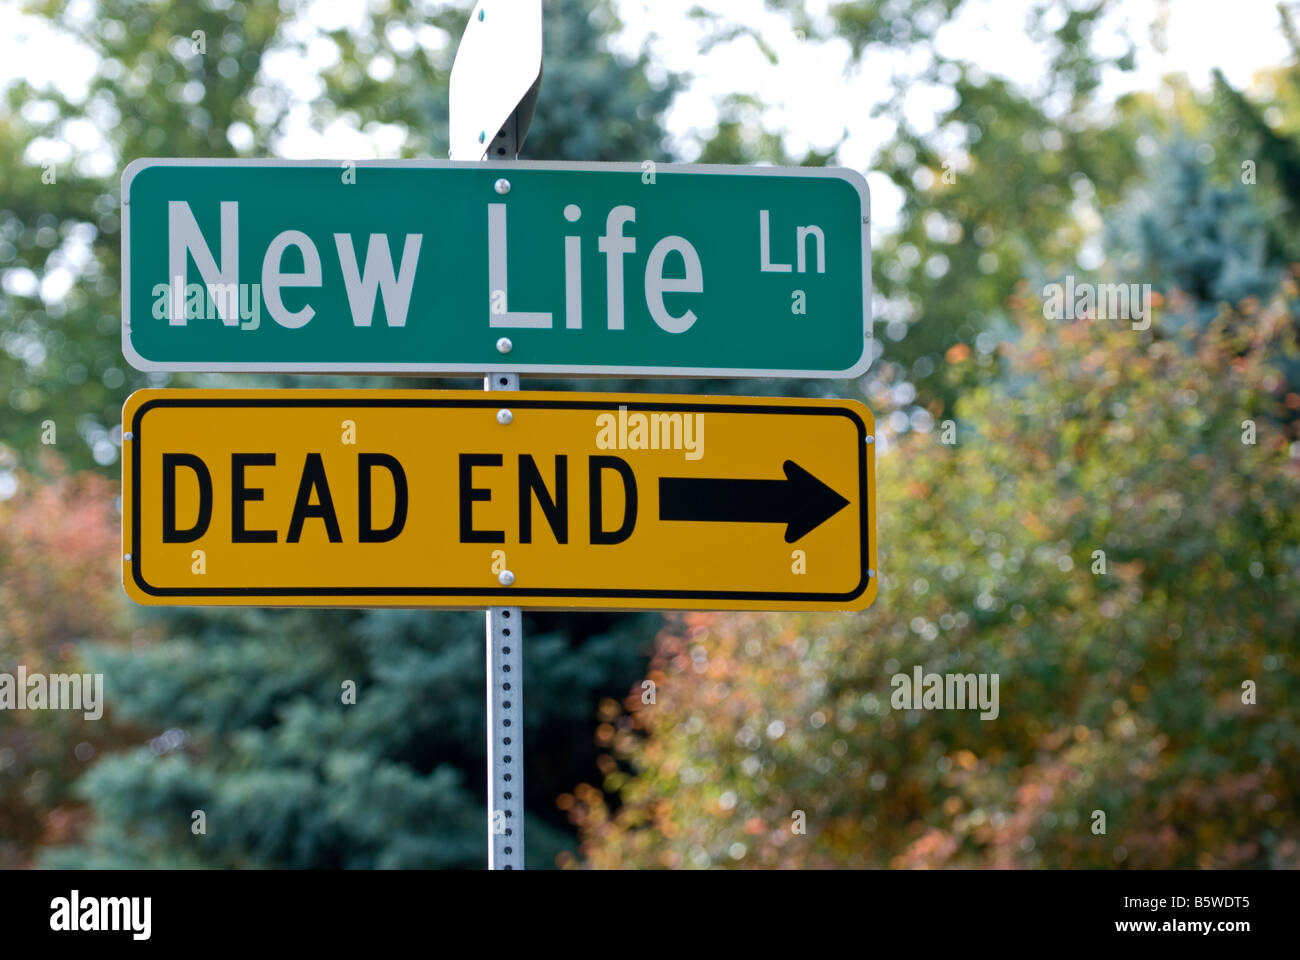 New Life street sign with Dead End sign below Stock Photo